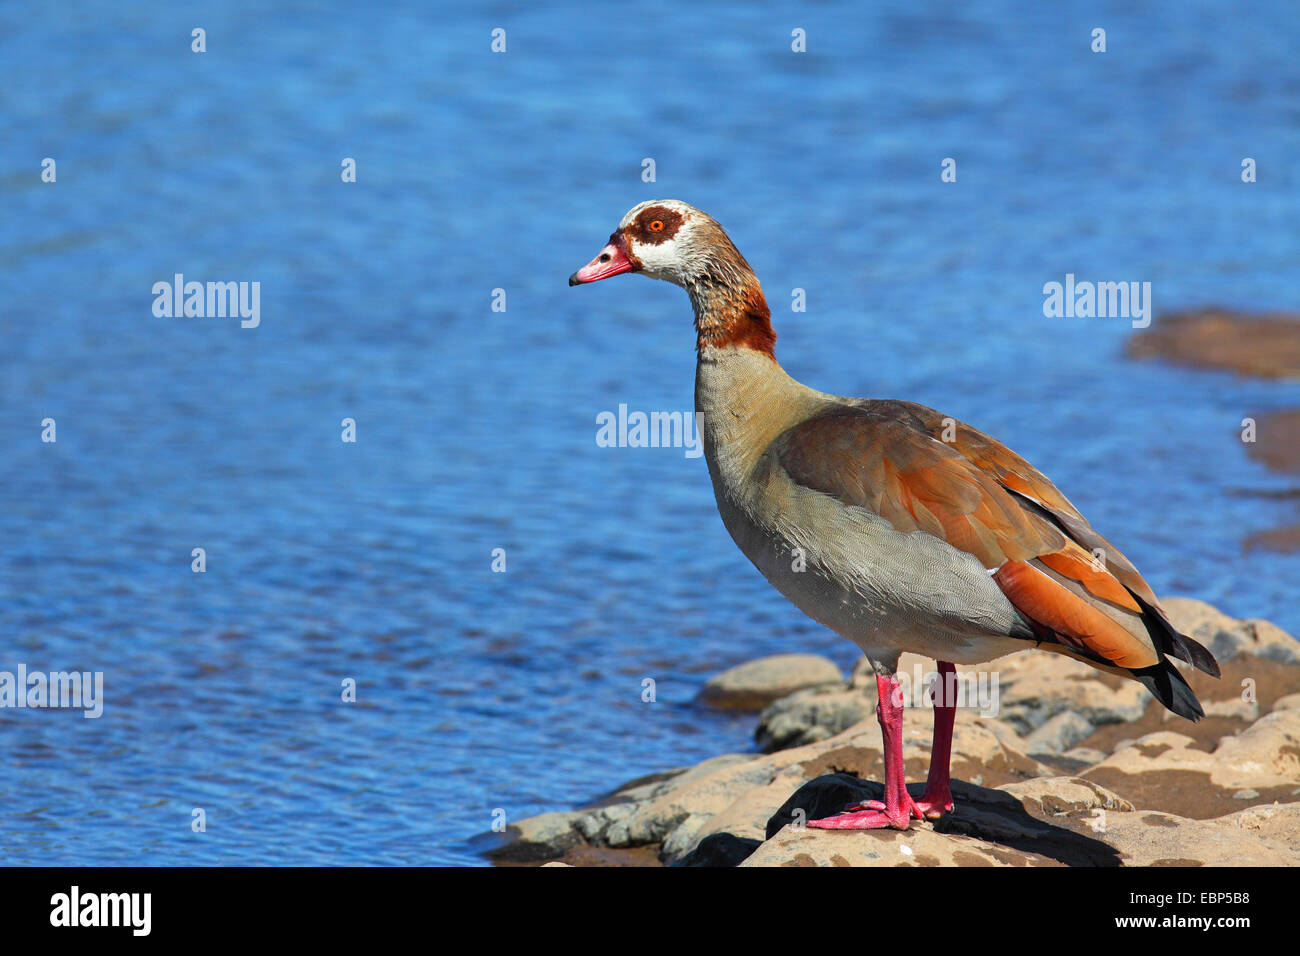 Egyptian goose (Alopochen aegyptiacus), at Olifants River, South Africa, Krueger National Park Stock Photo